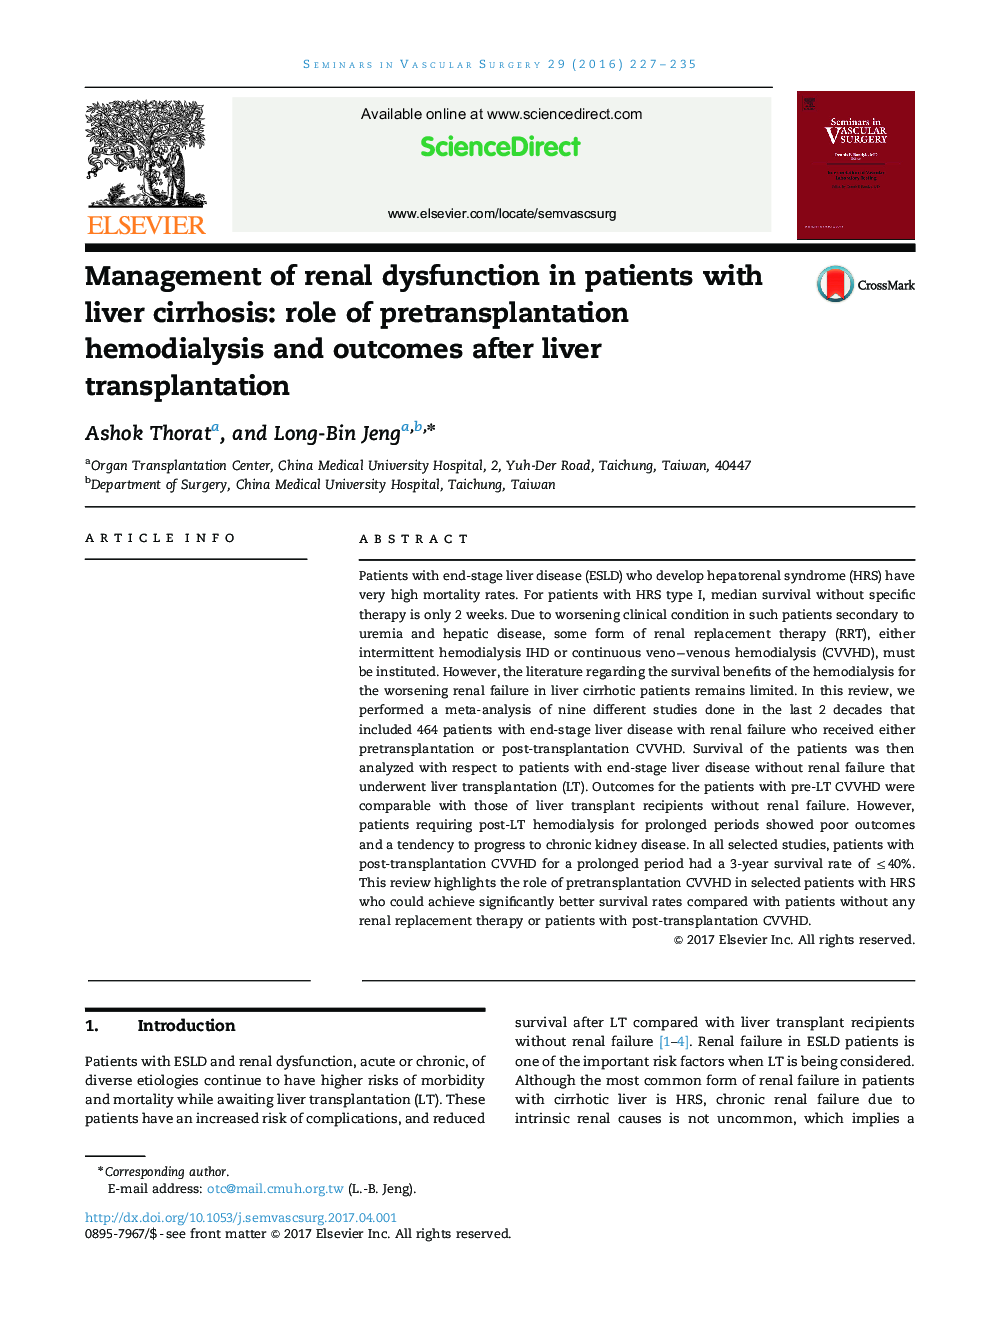 Management of renal dysfunction in patients with liver cirrhosis: role of pretransplantation hemodialysis and outcomes after liver transplantation